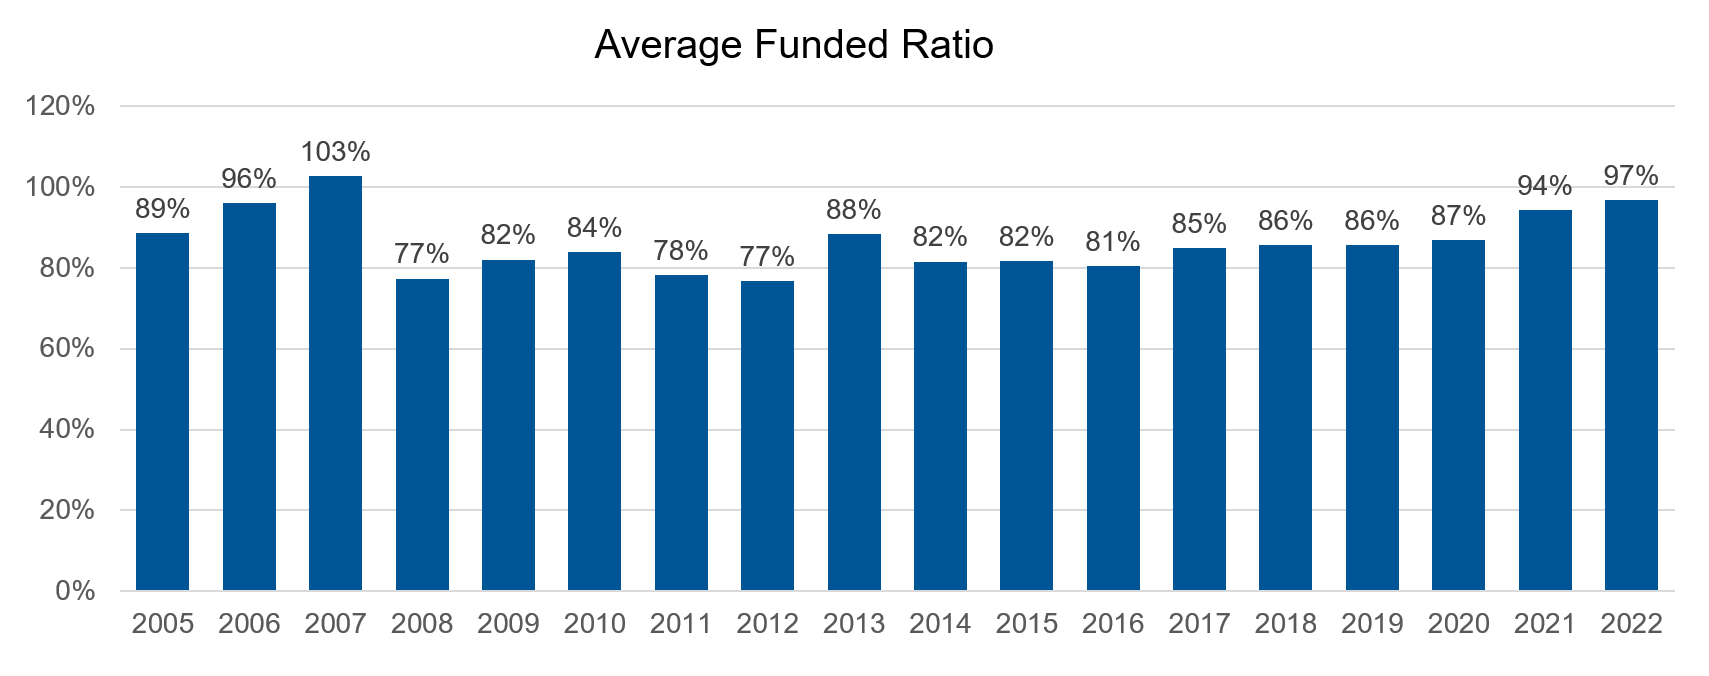 Funded ratio bar chart from 2005 to 2022